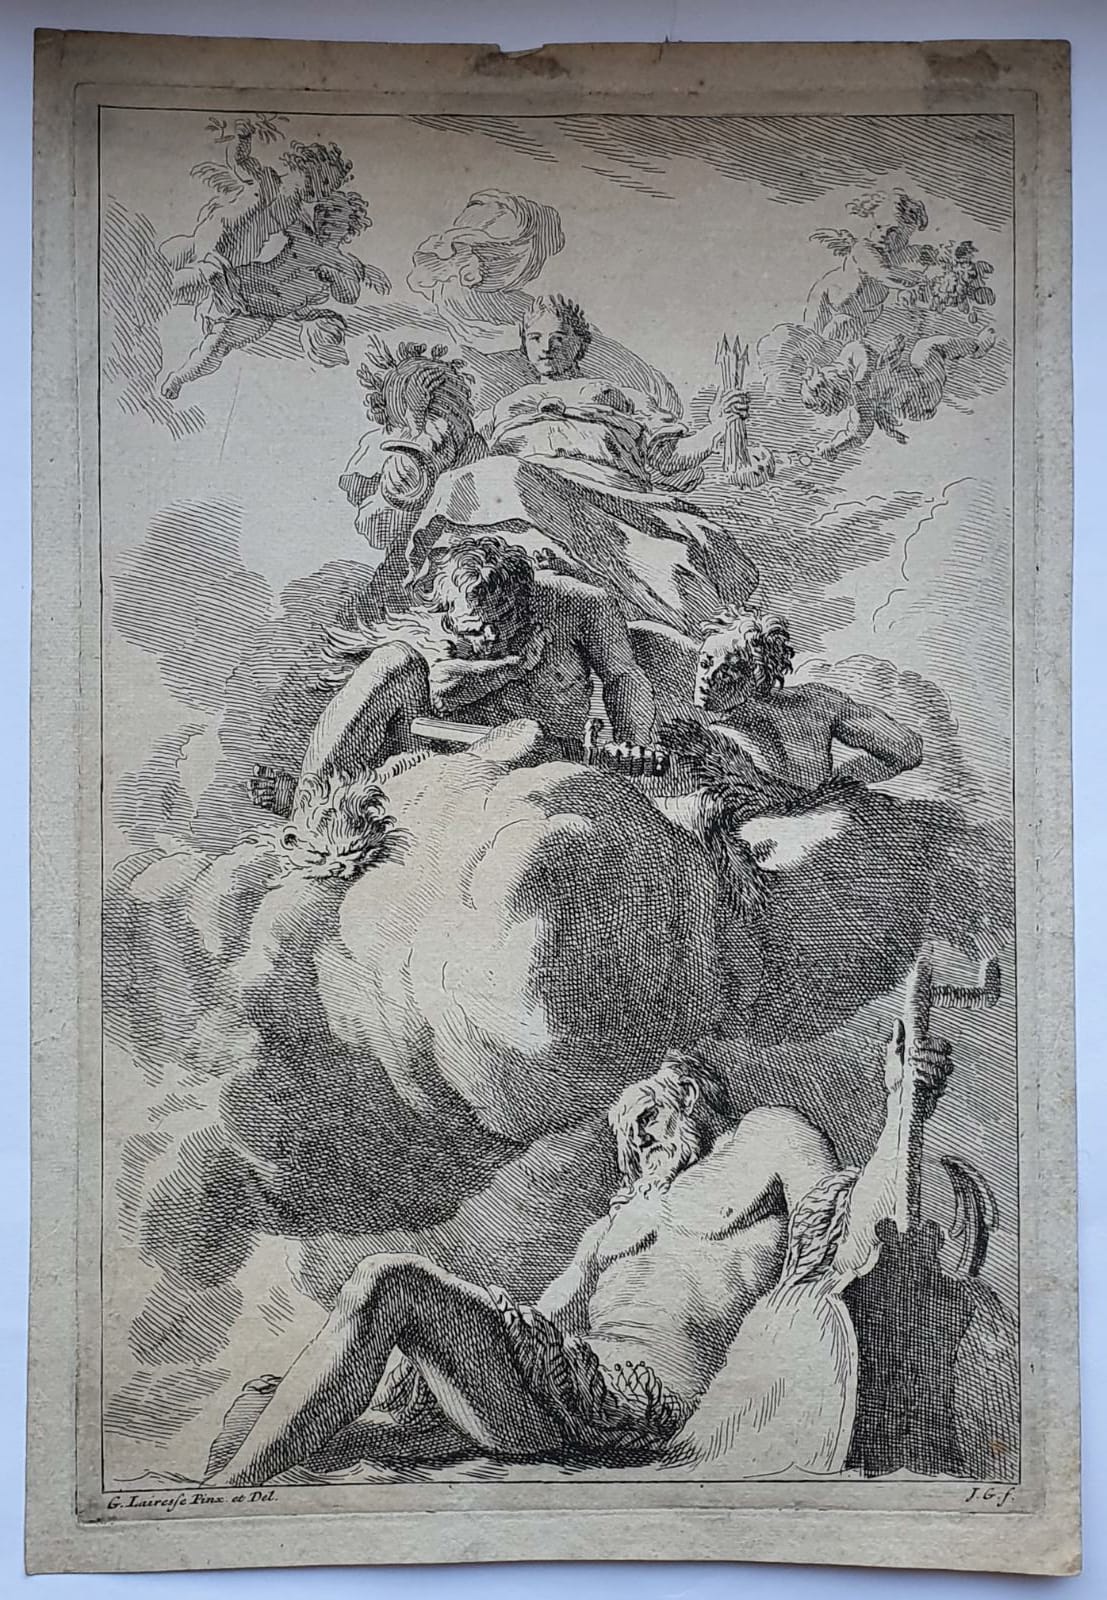 [Antique print, etching/ets] Unity has chained wrath: an allegory of concord, published 1650-1750.